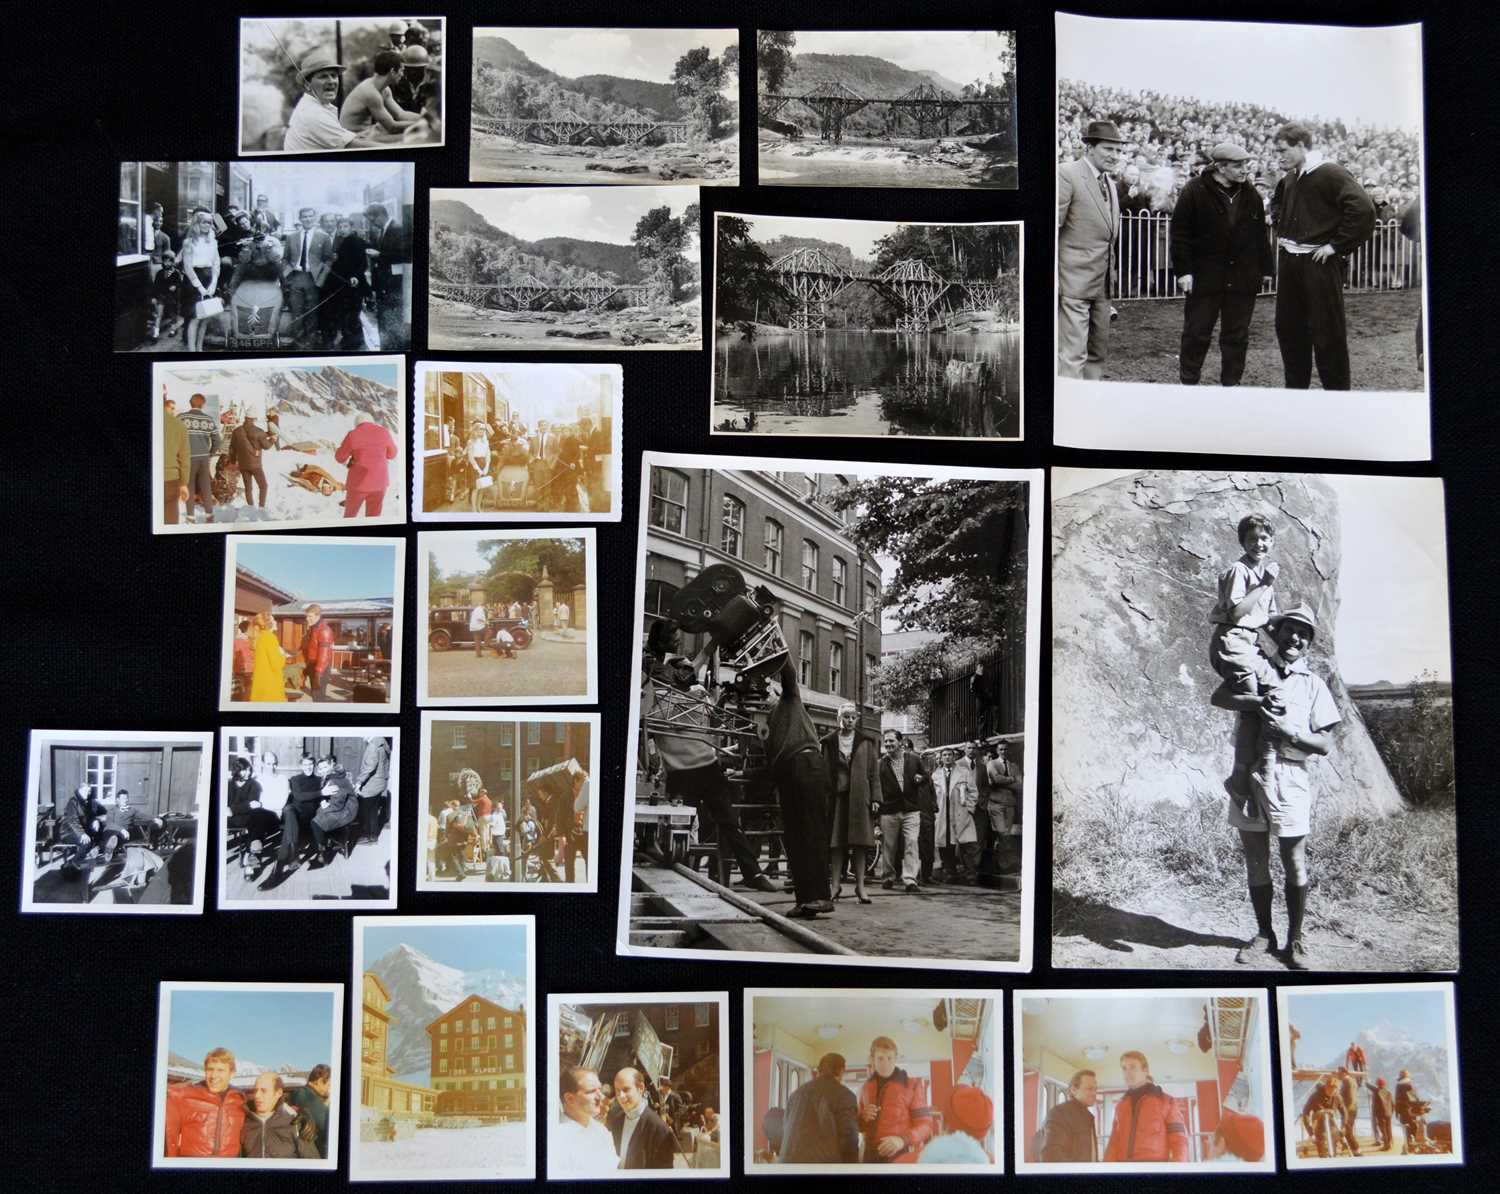 Behind the scenes photographs and postcards from legendary films of the 50's and 60's